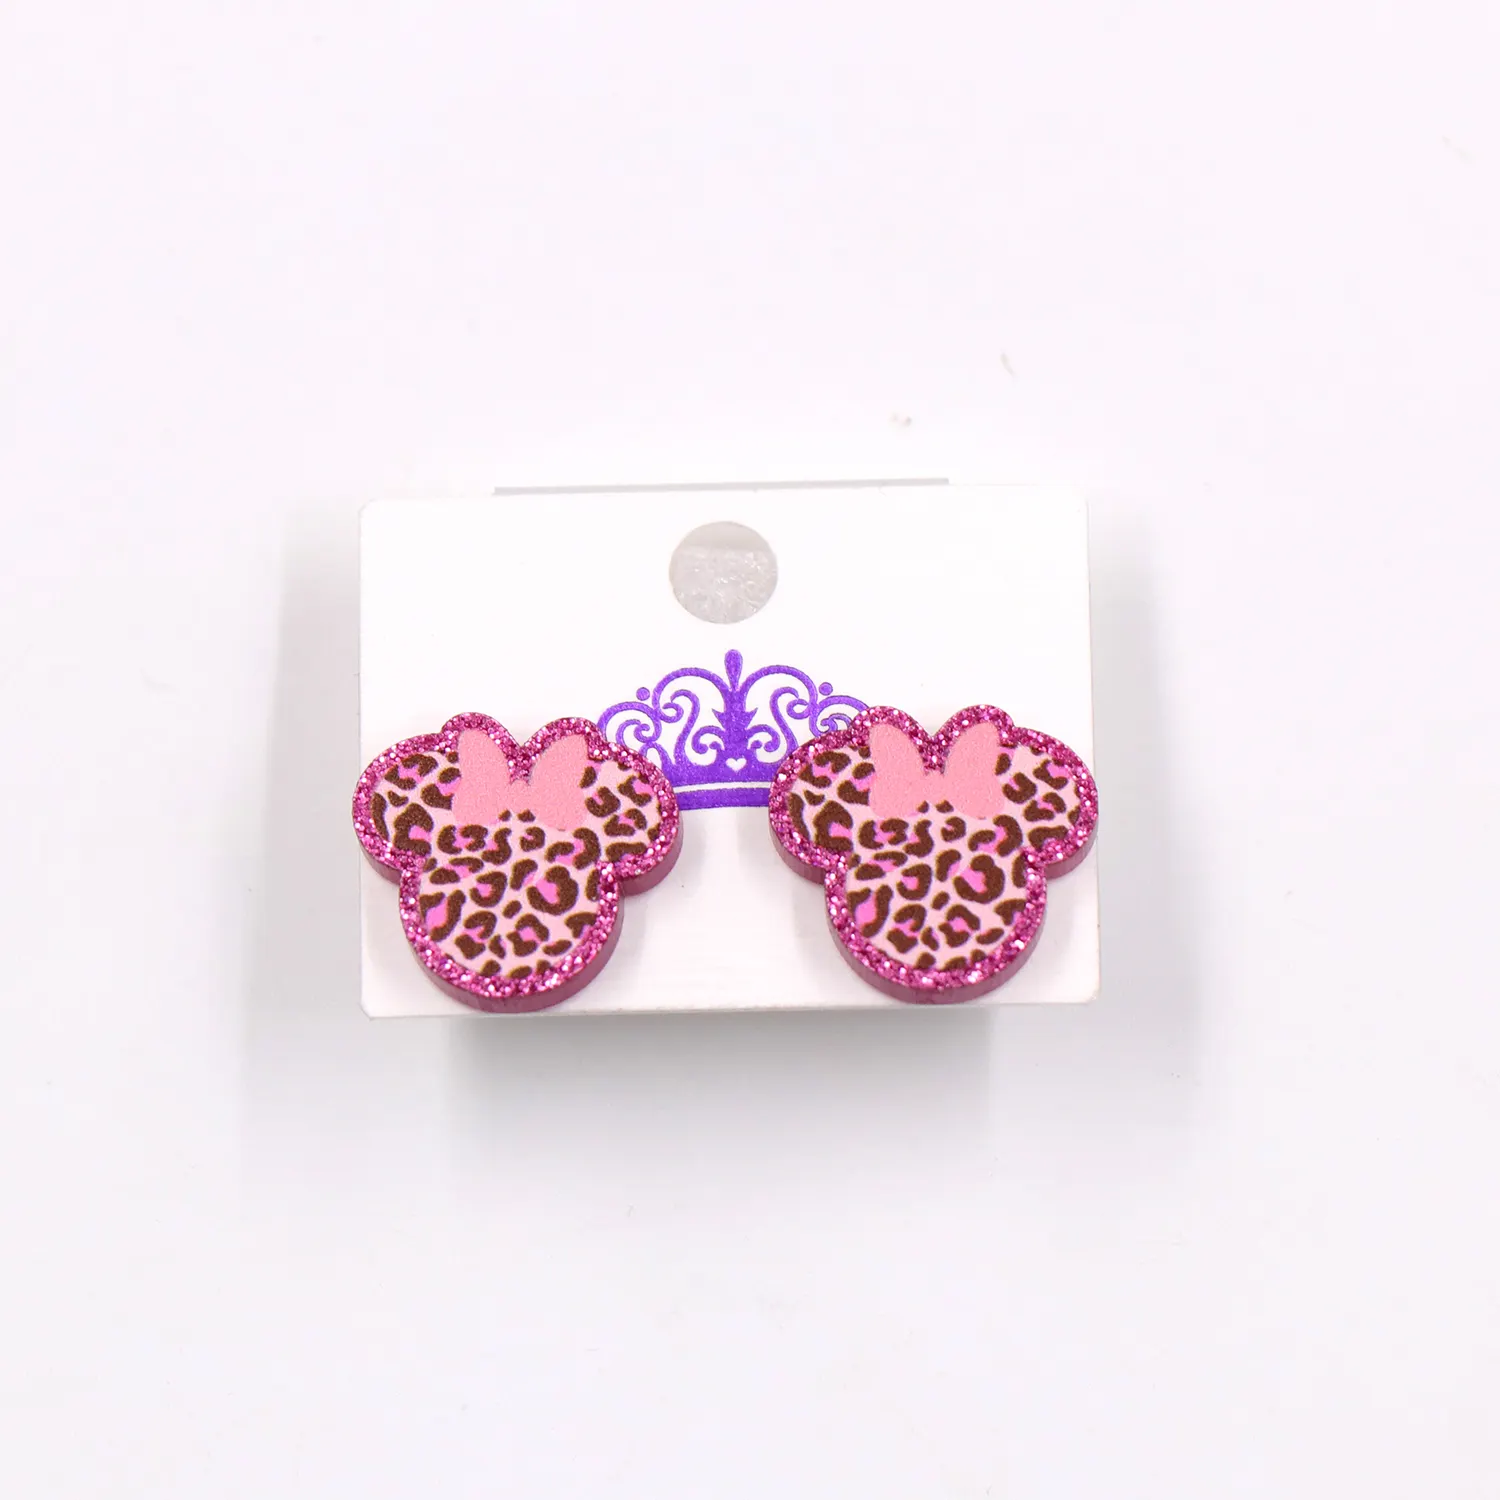 ERS660ER1458 Fashion Female Mouse Head Pink Leopard Jewelry For Girl Acrylic Stud Earrings